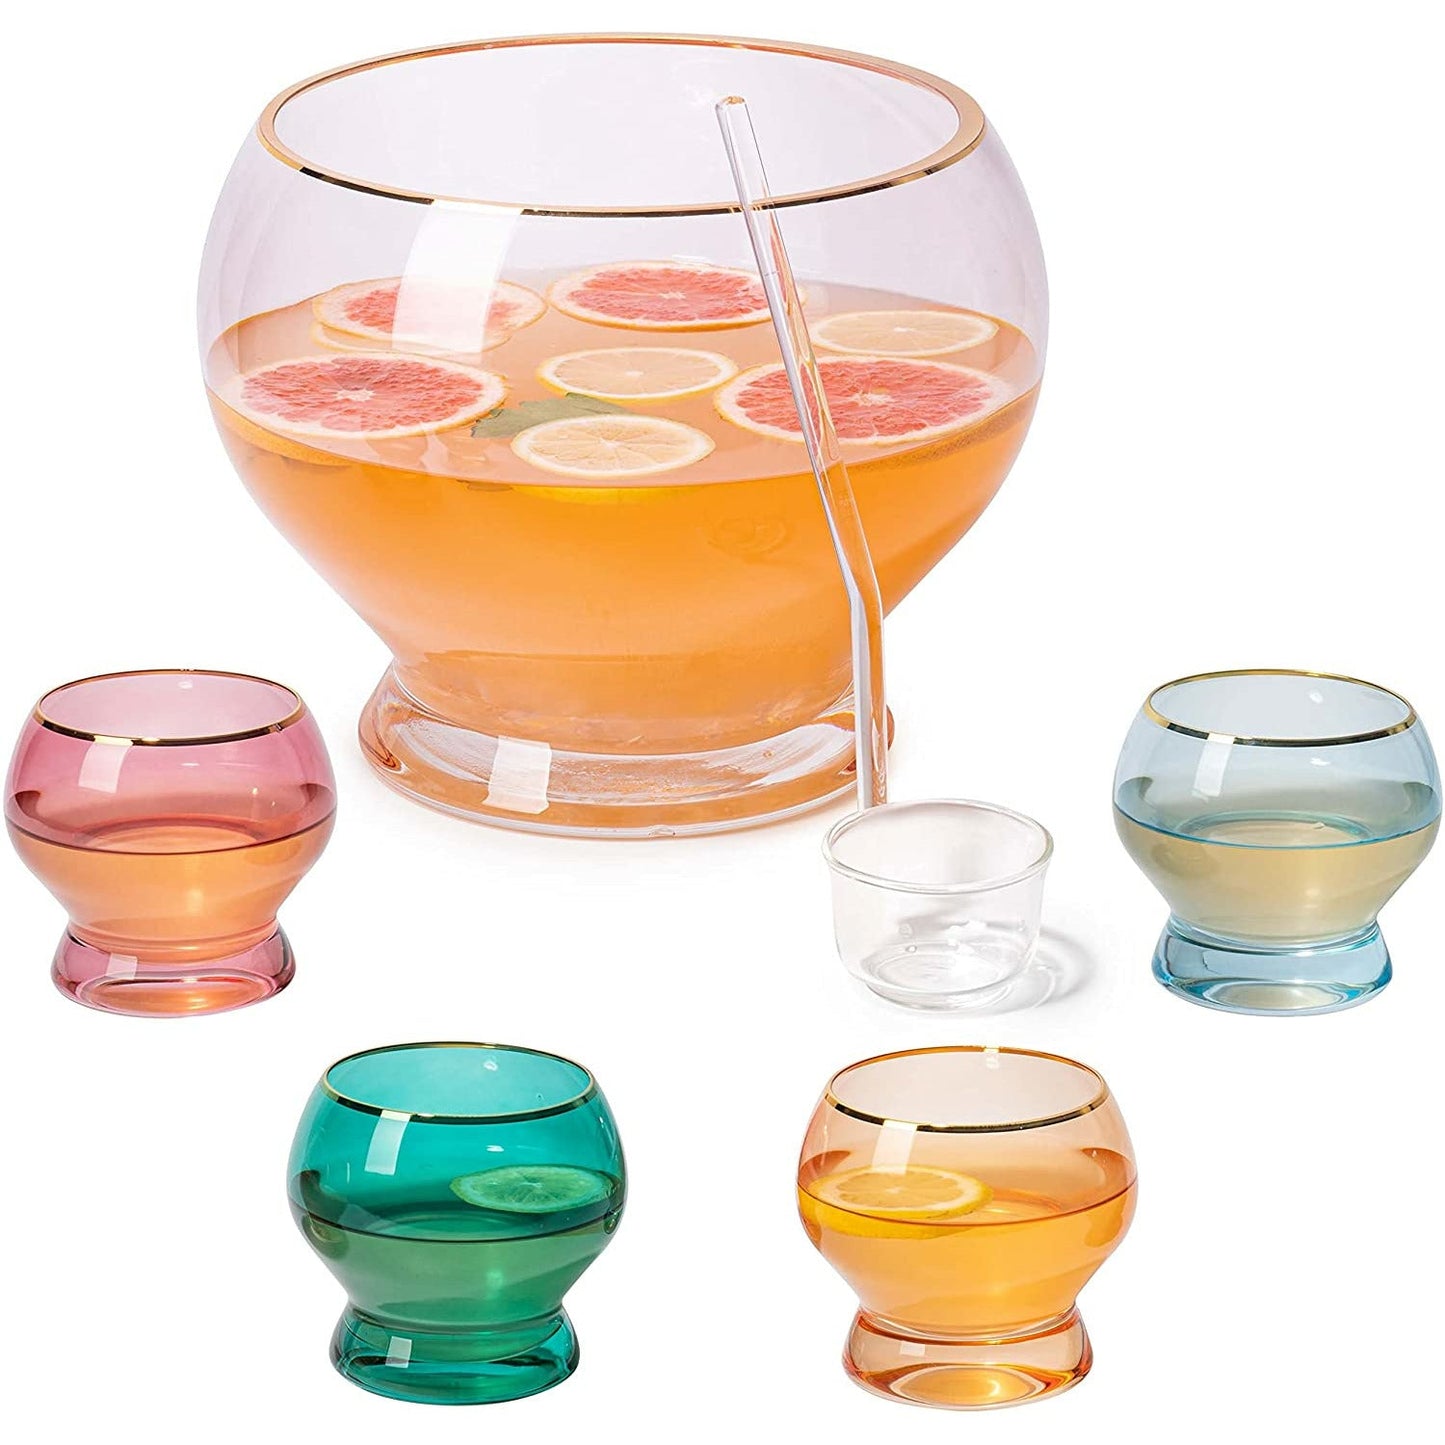 Colorful 3 Gallon Punch Bowl with 4 10oz Glasses Set & Ladle - by The Wine Savant